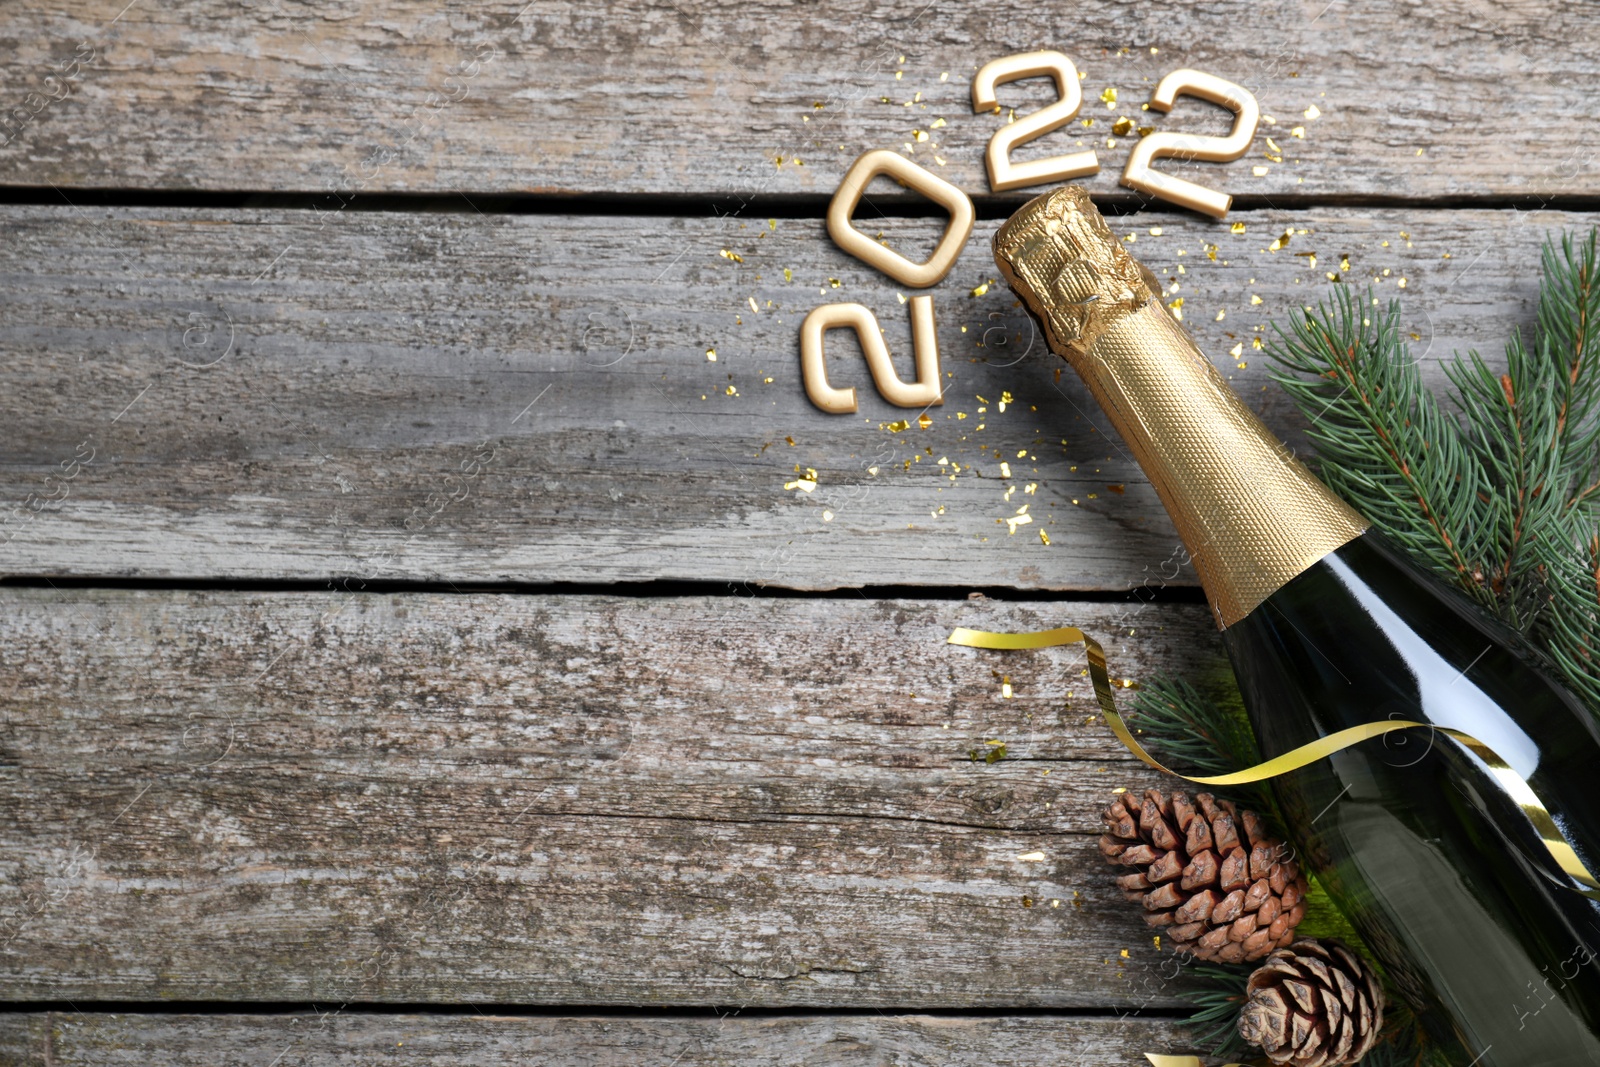 Photo of Happy New Year 2022! Flat lay composition with bottle of sparkling wine on wooden table, space for text